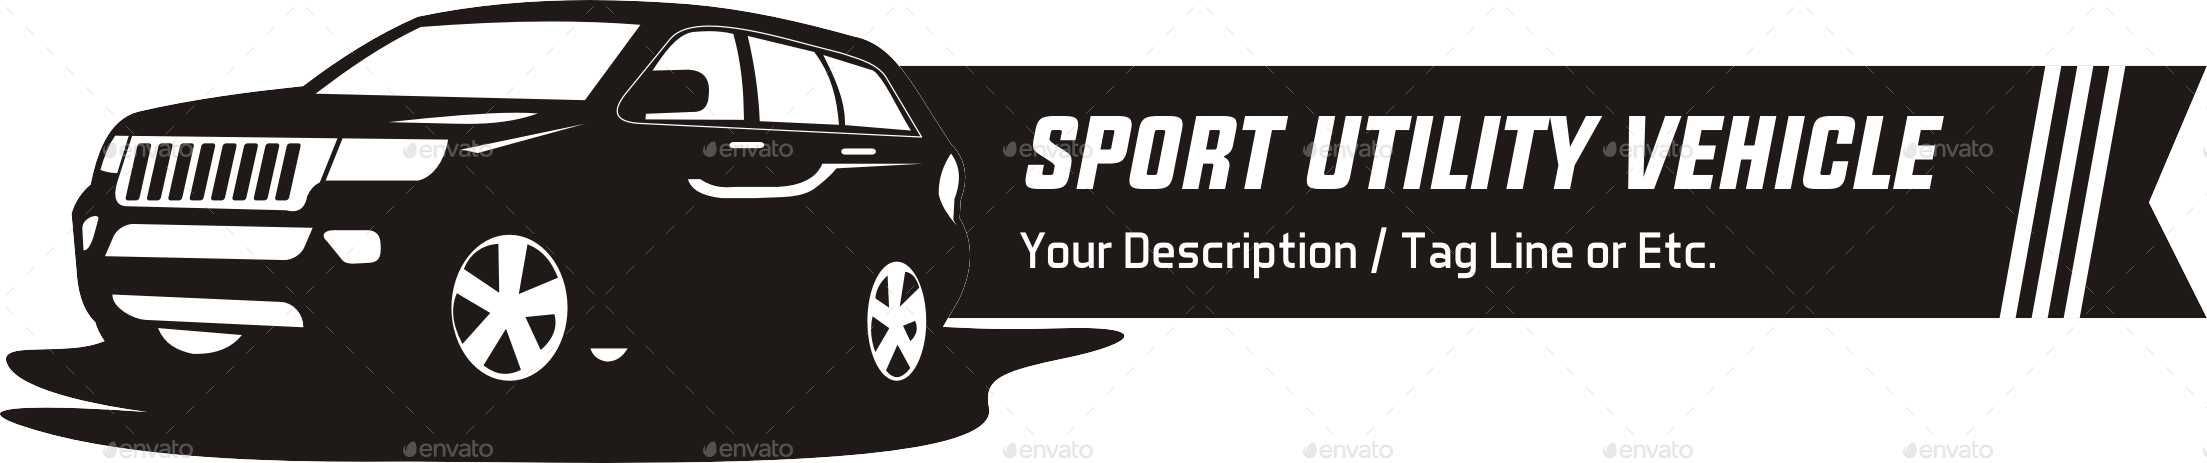 Sport Utility Vehicle Graphic Banner